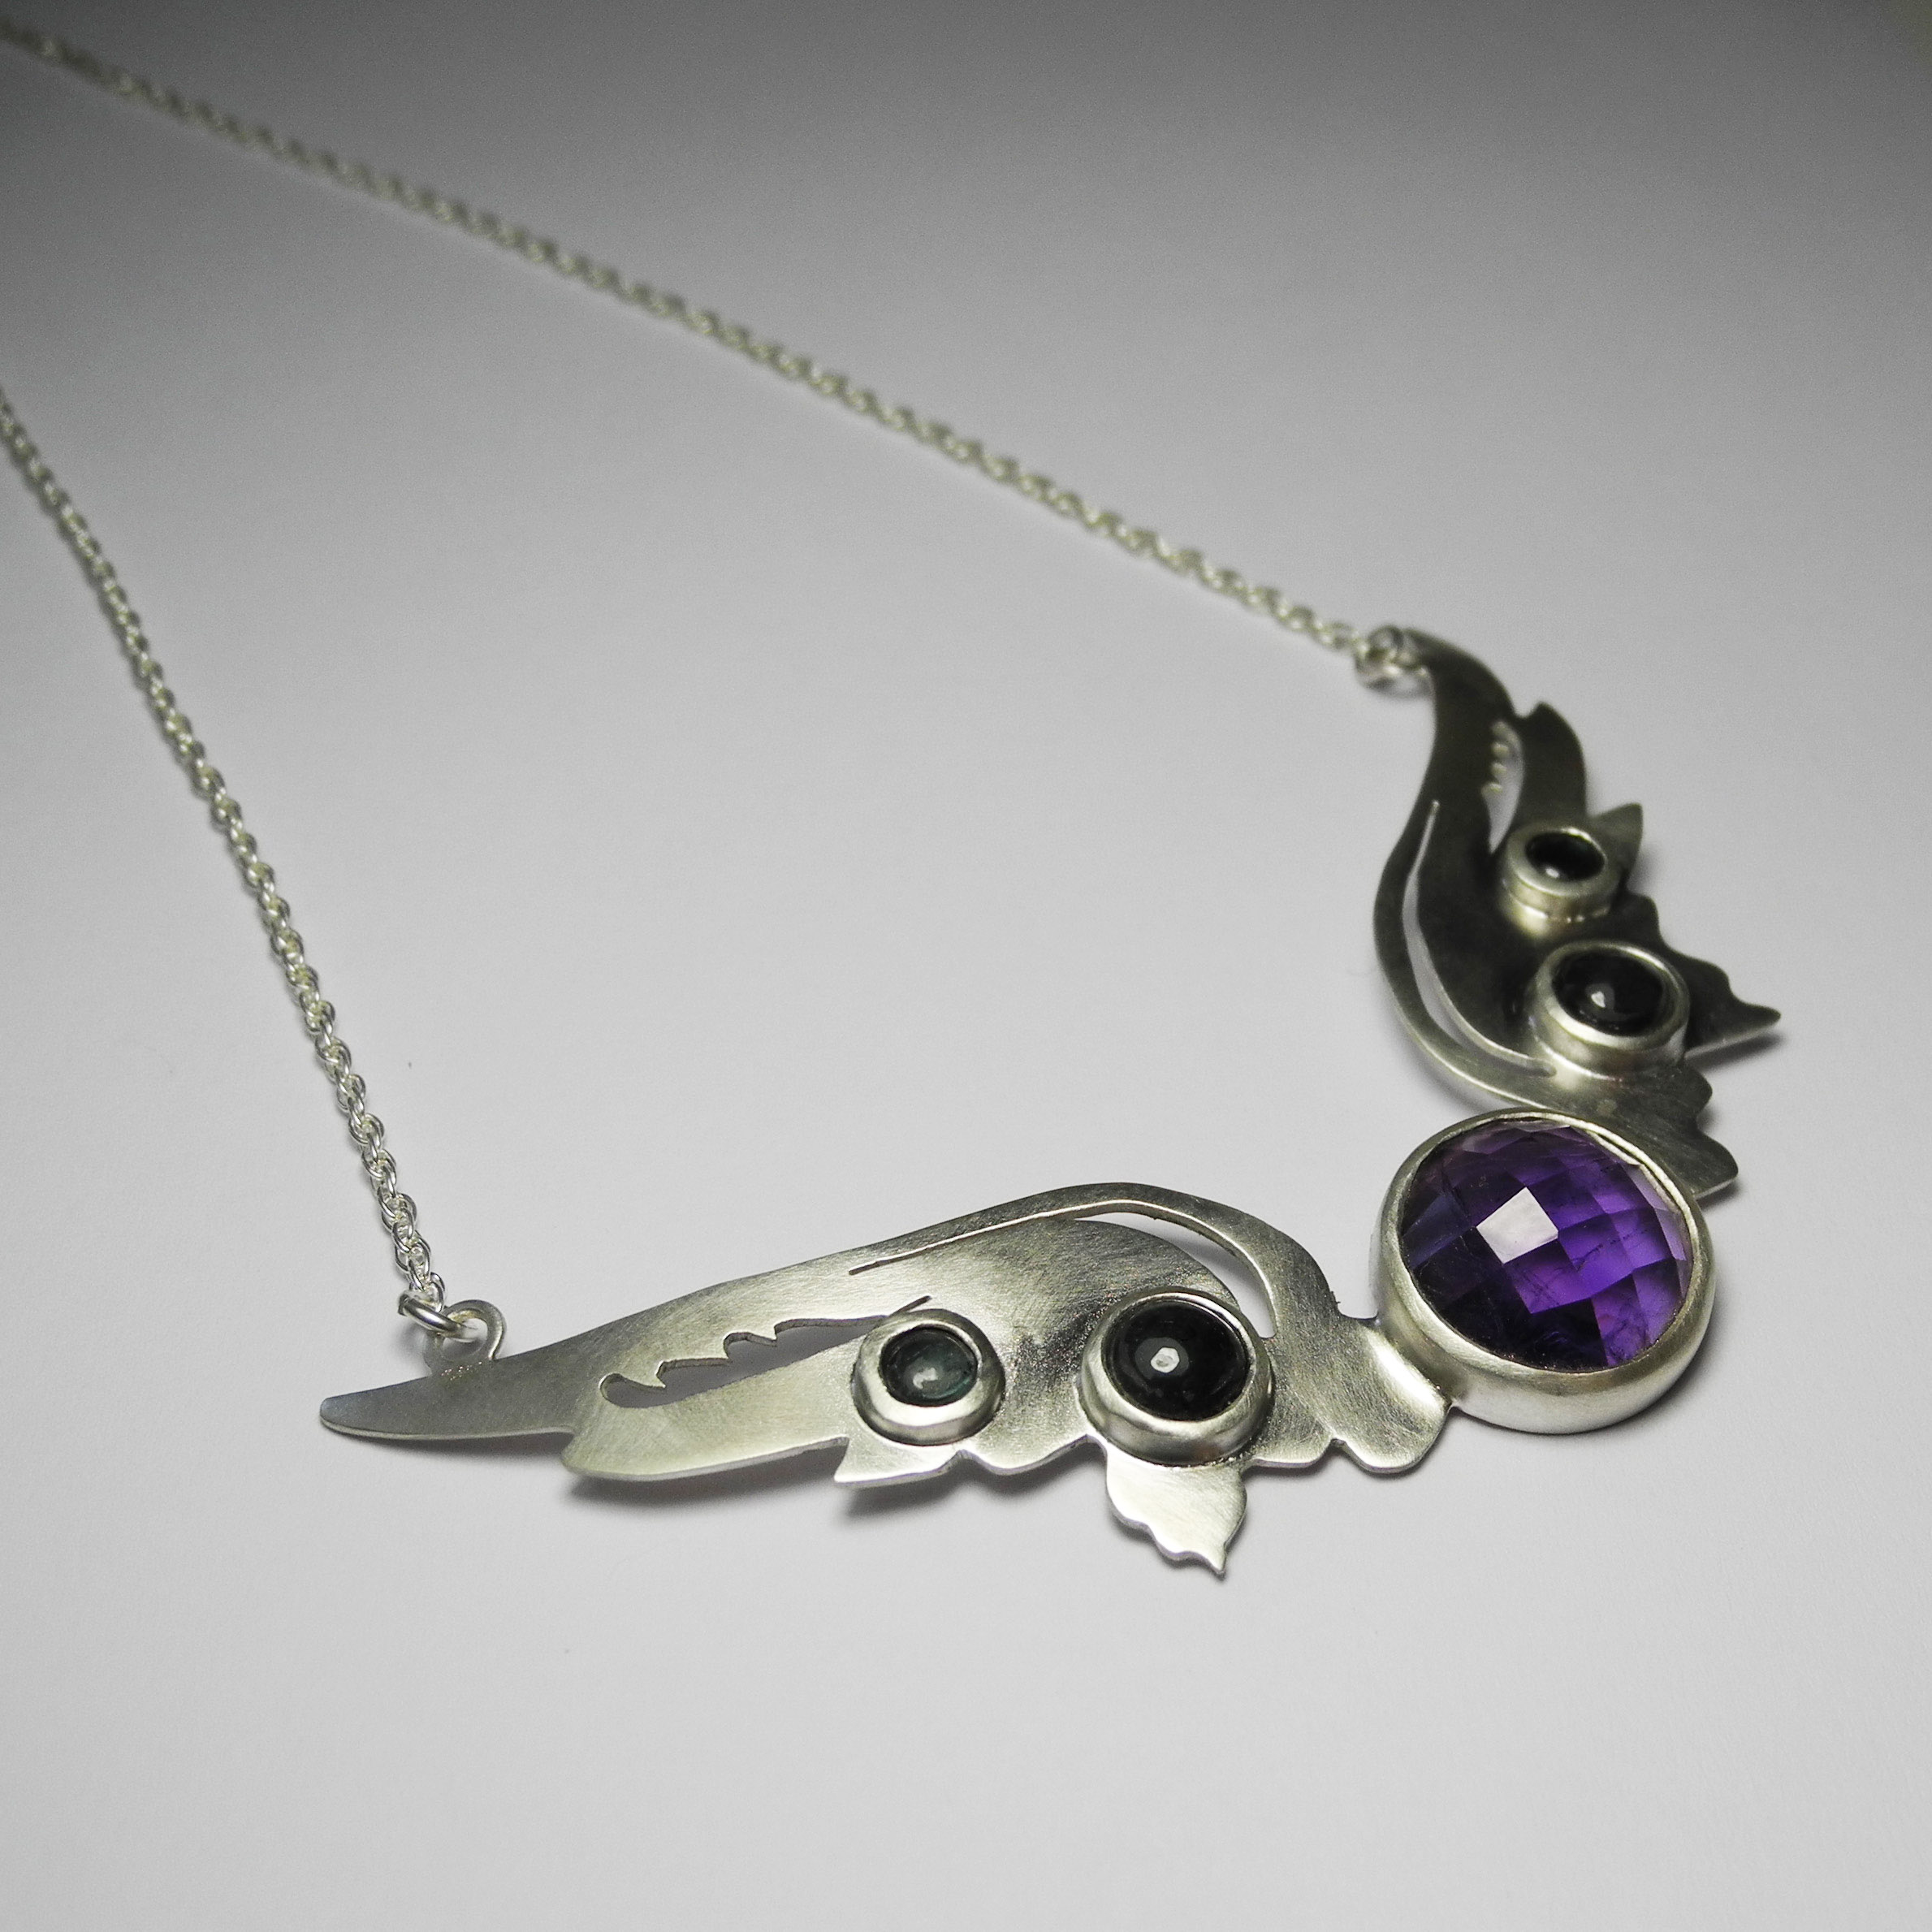 Hermes Wings pendant with amethyst and blue/green tourmaline